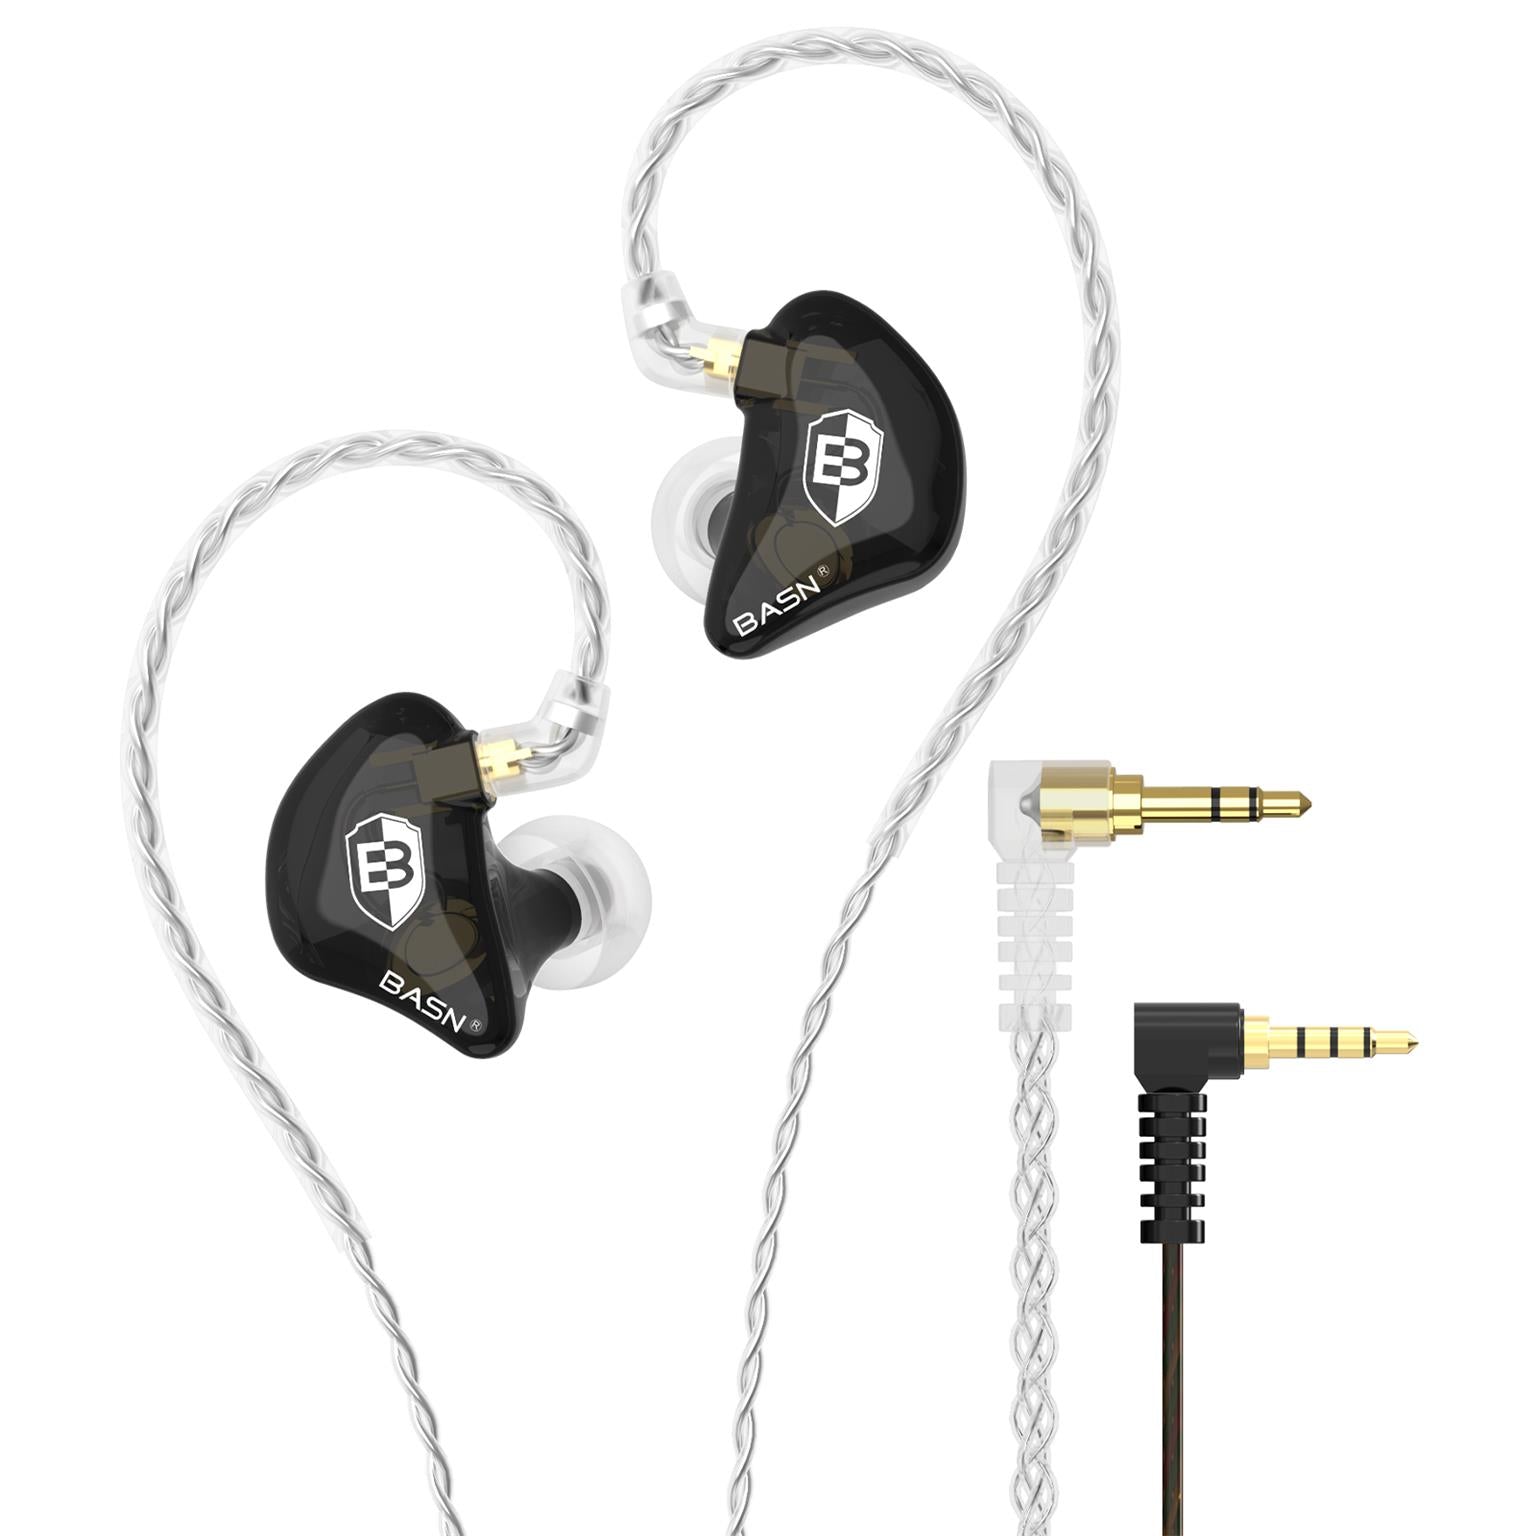 BASN LUX in Ear Monitor Earphone Headphone with Noise Cancelling for  Musician Band Singer 並行輸入品 再再販！